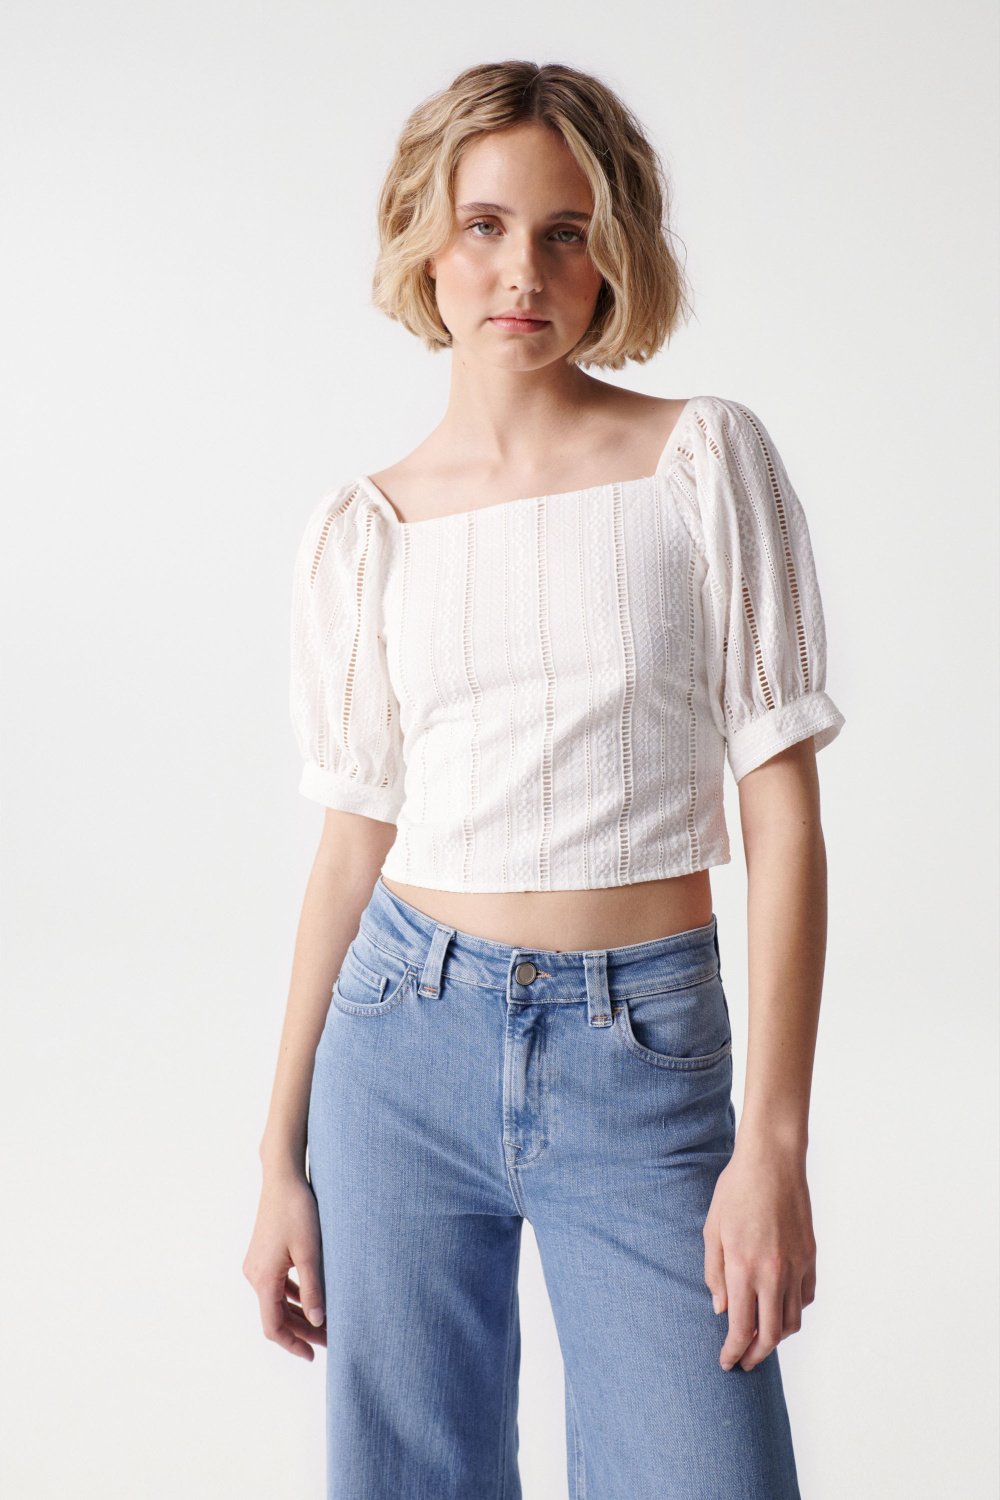 Embroidered top - Salsa